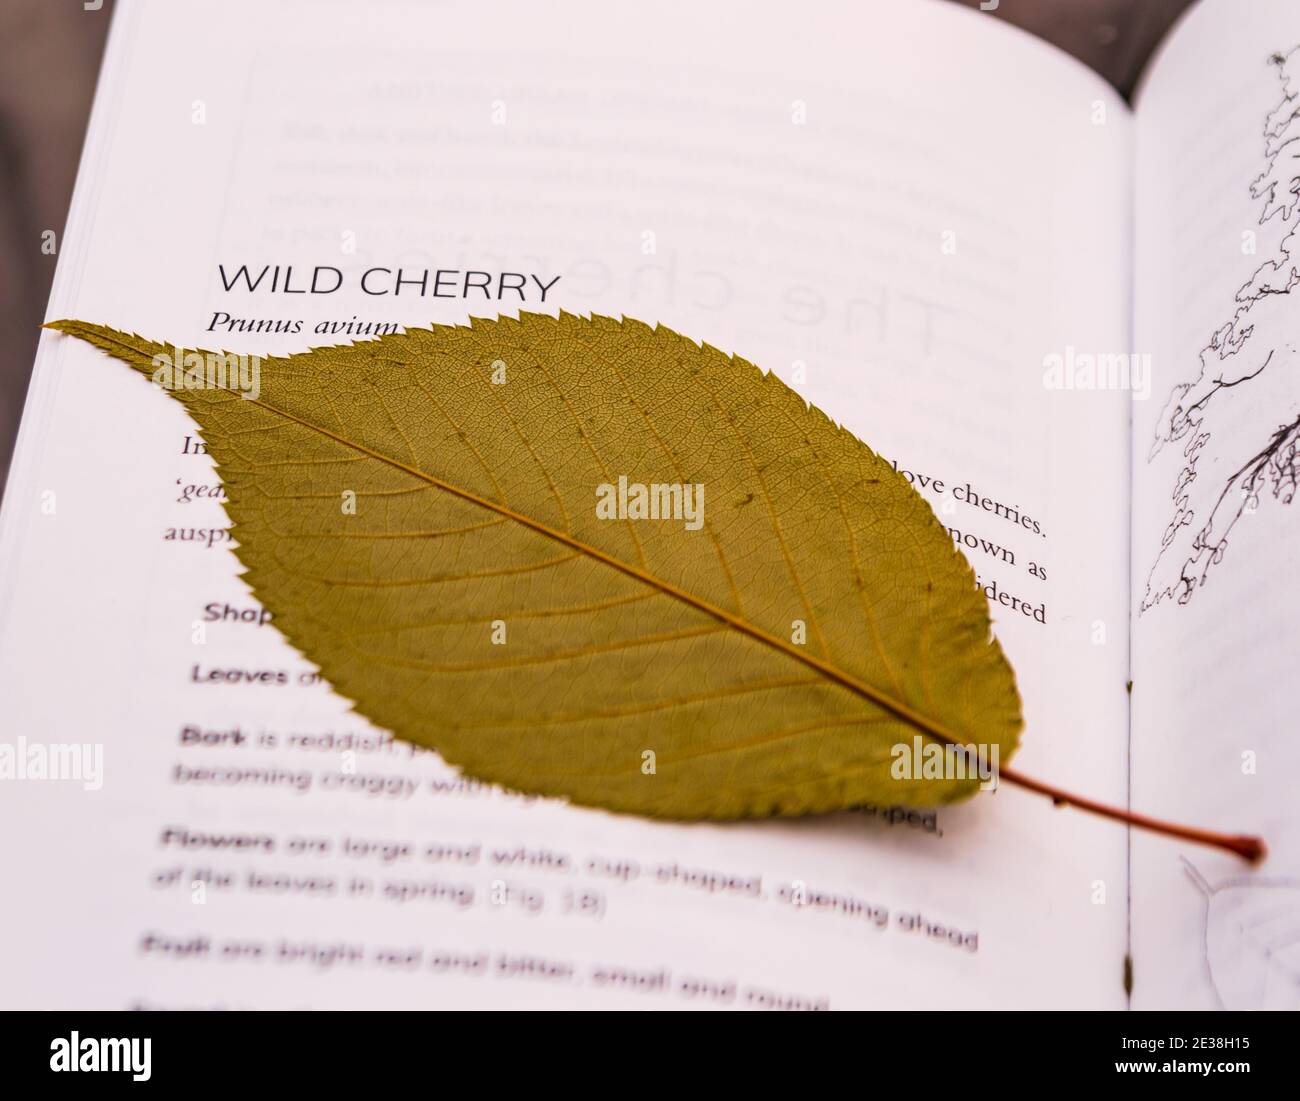 Wild Cherry (prunus avium) leaf dried within the pages of a book Stock Photo